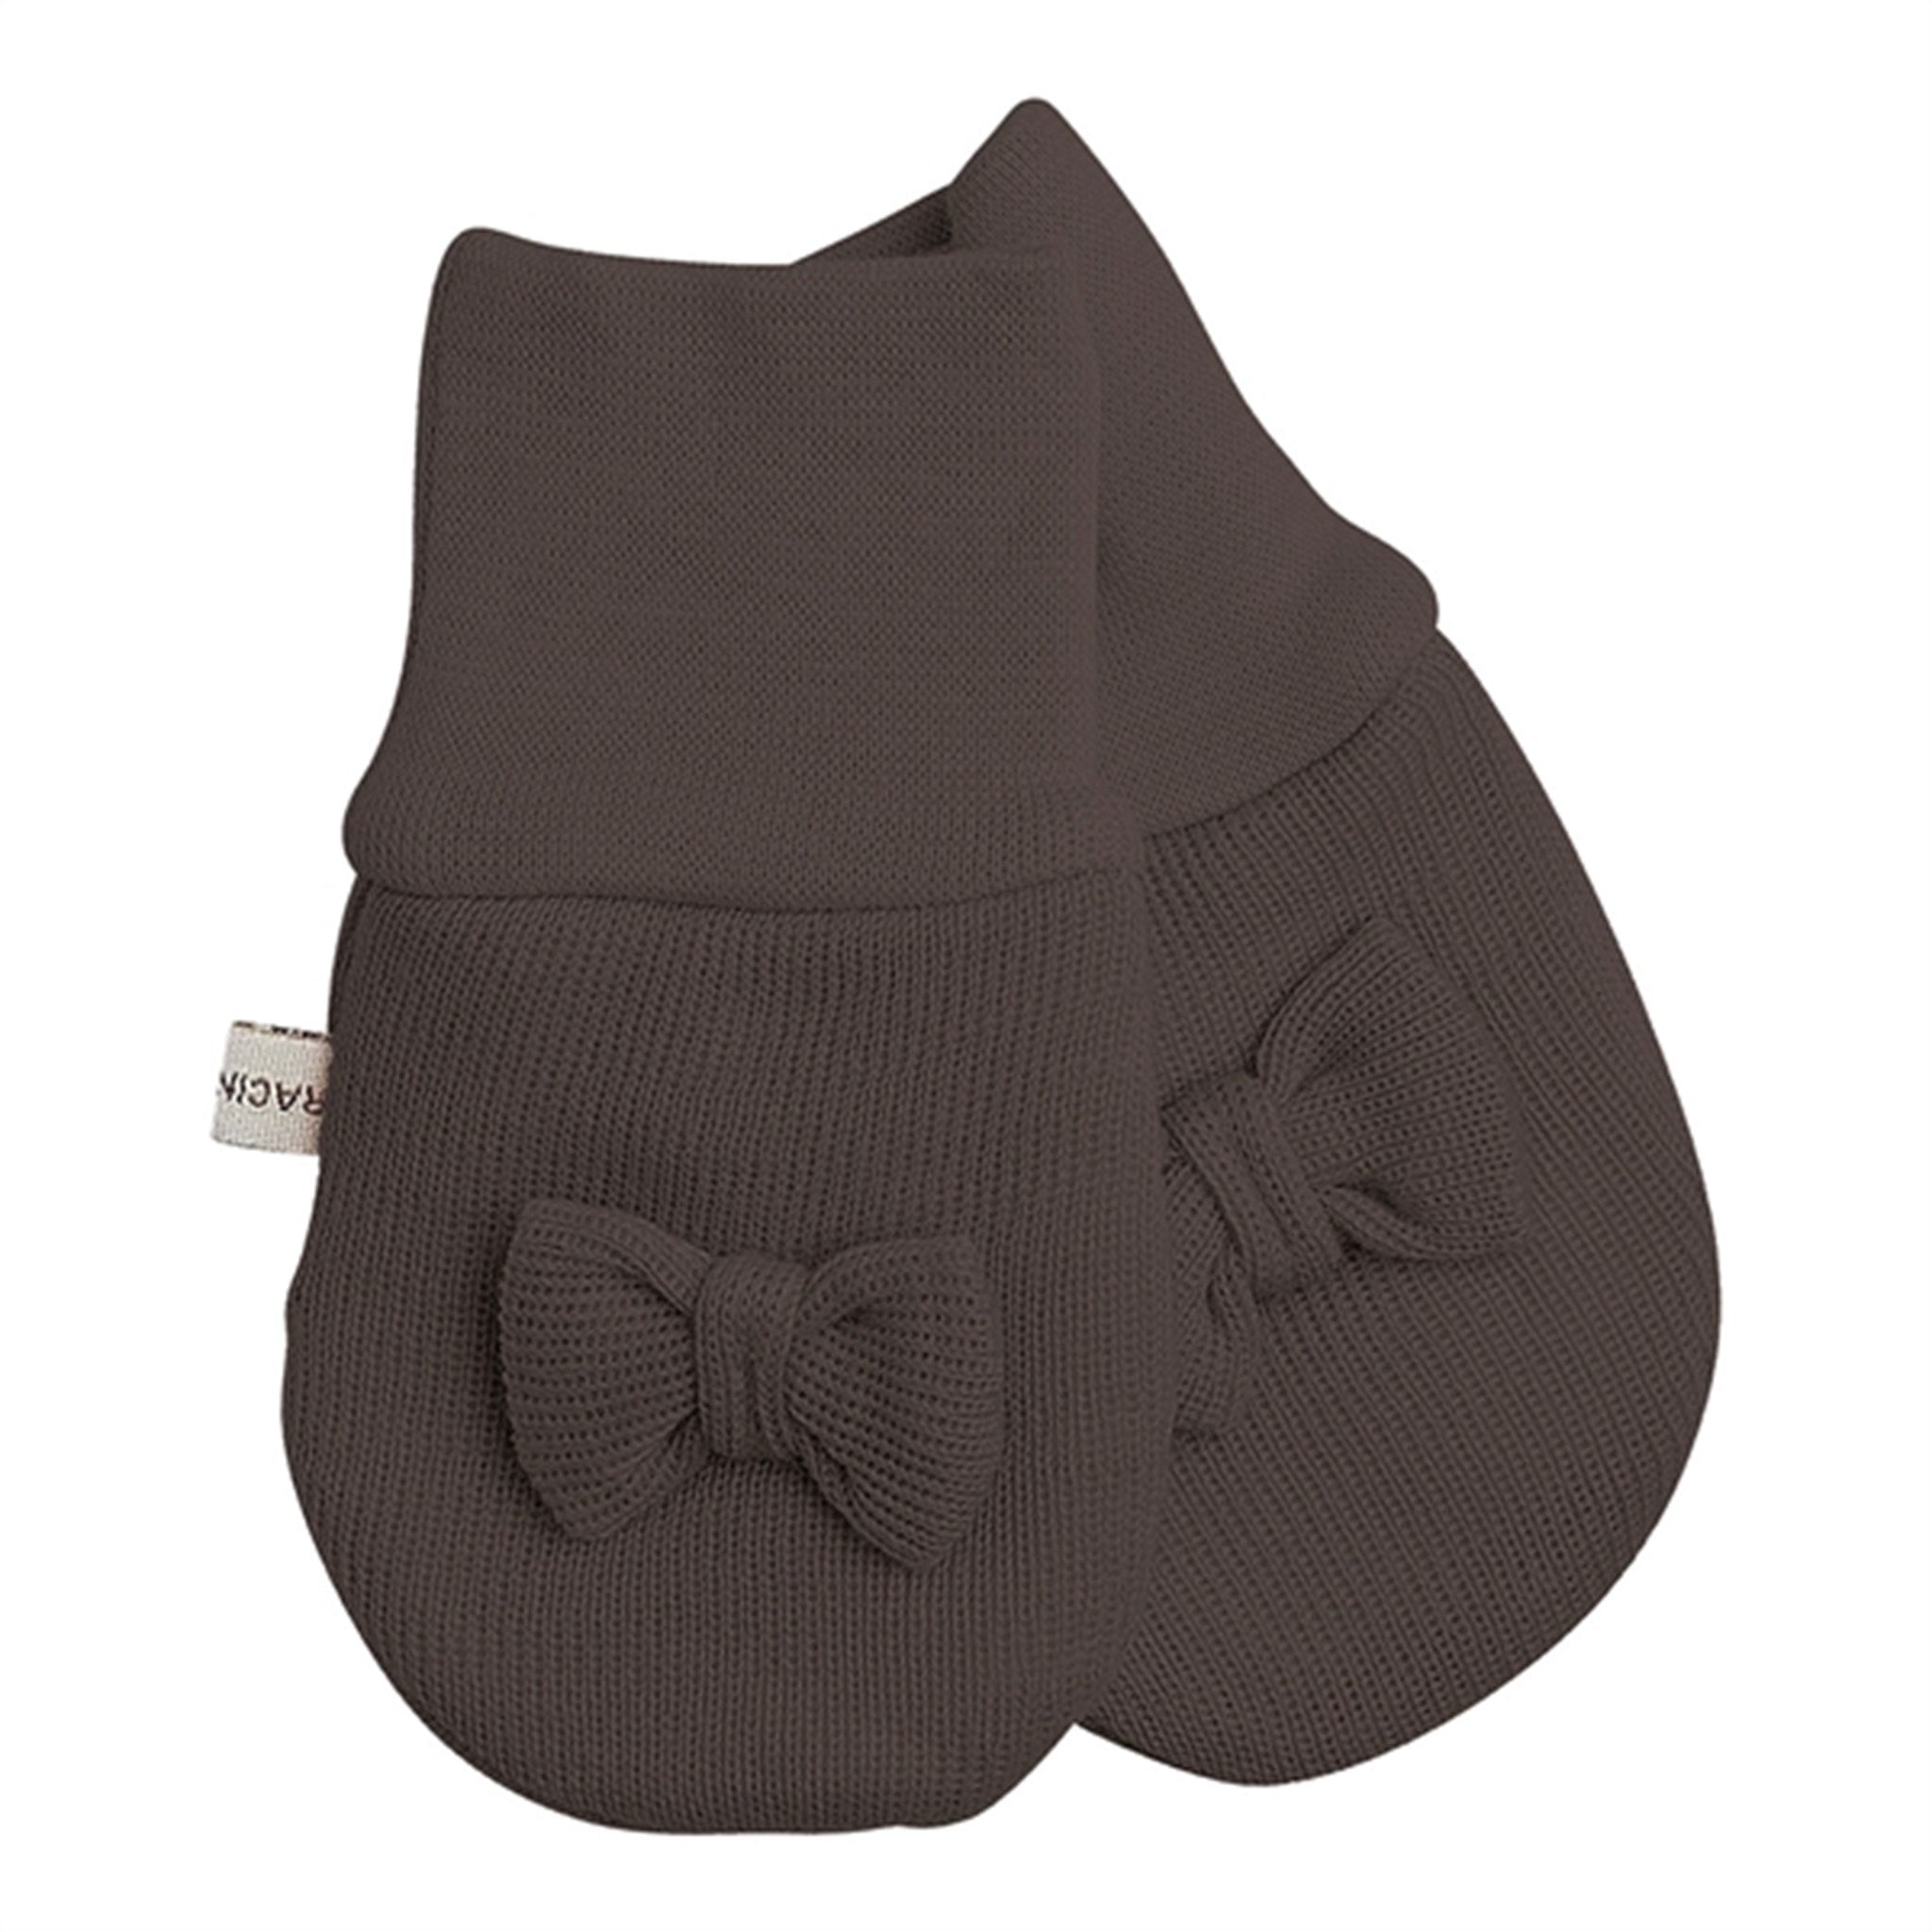 Racing Kids Mittens Baby Bow Chocolate Brown